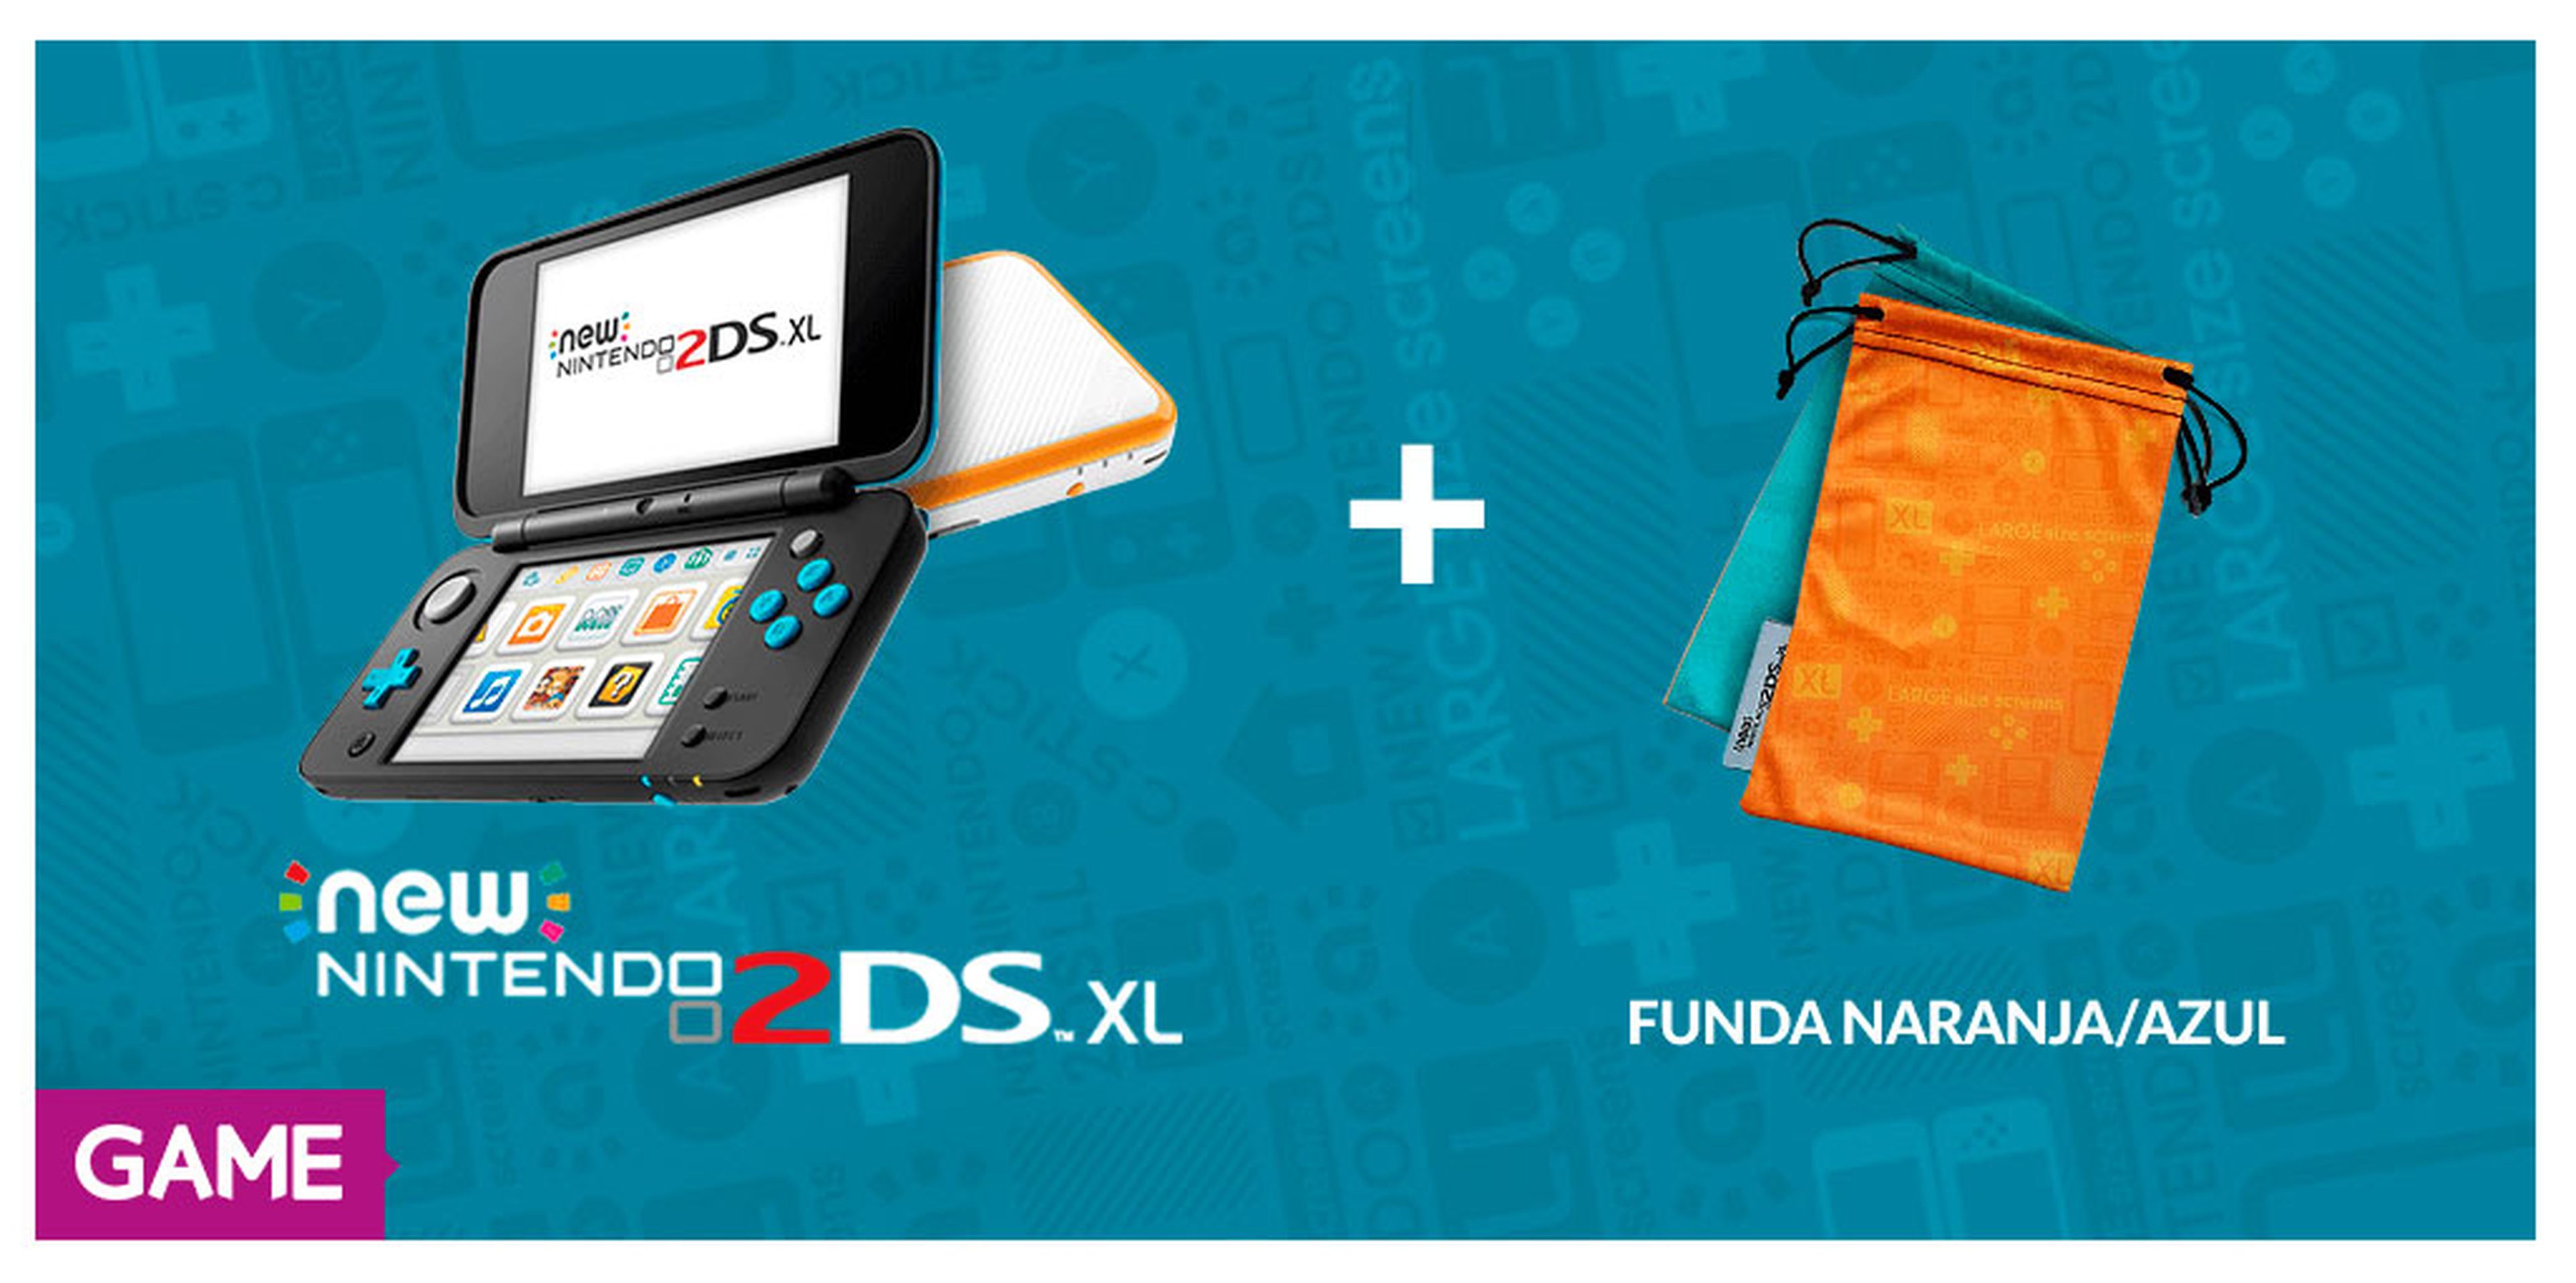 New Nintendo 2DS XL GAME